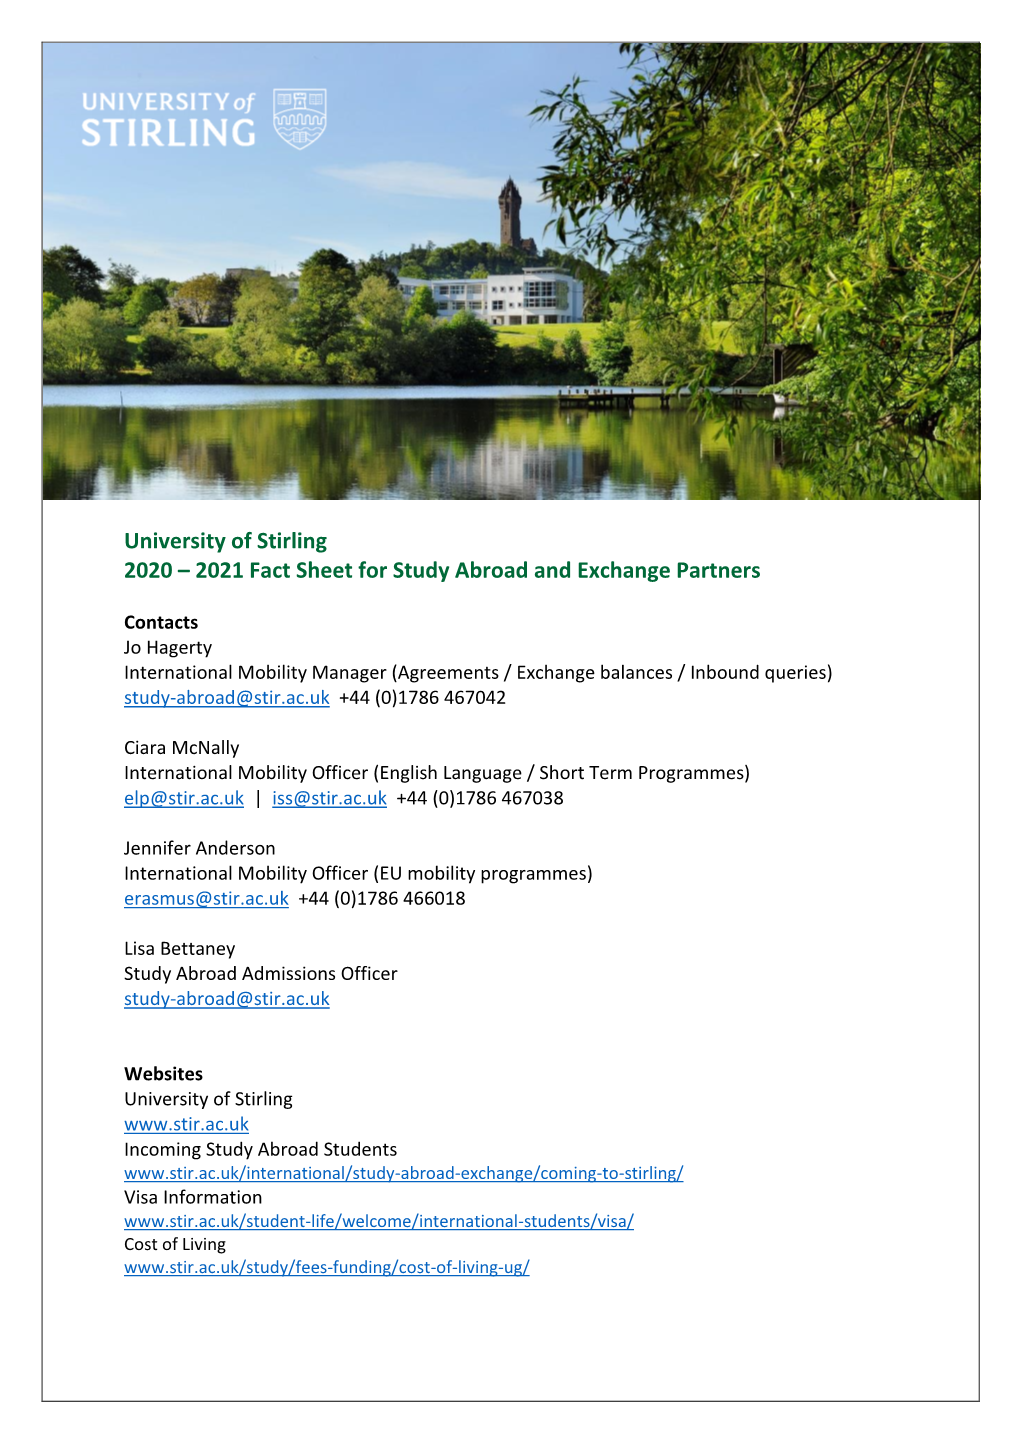 University of Stirling 2020 – 2021 Fact Sheet for Study Abroad and Exchange Partners